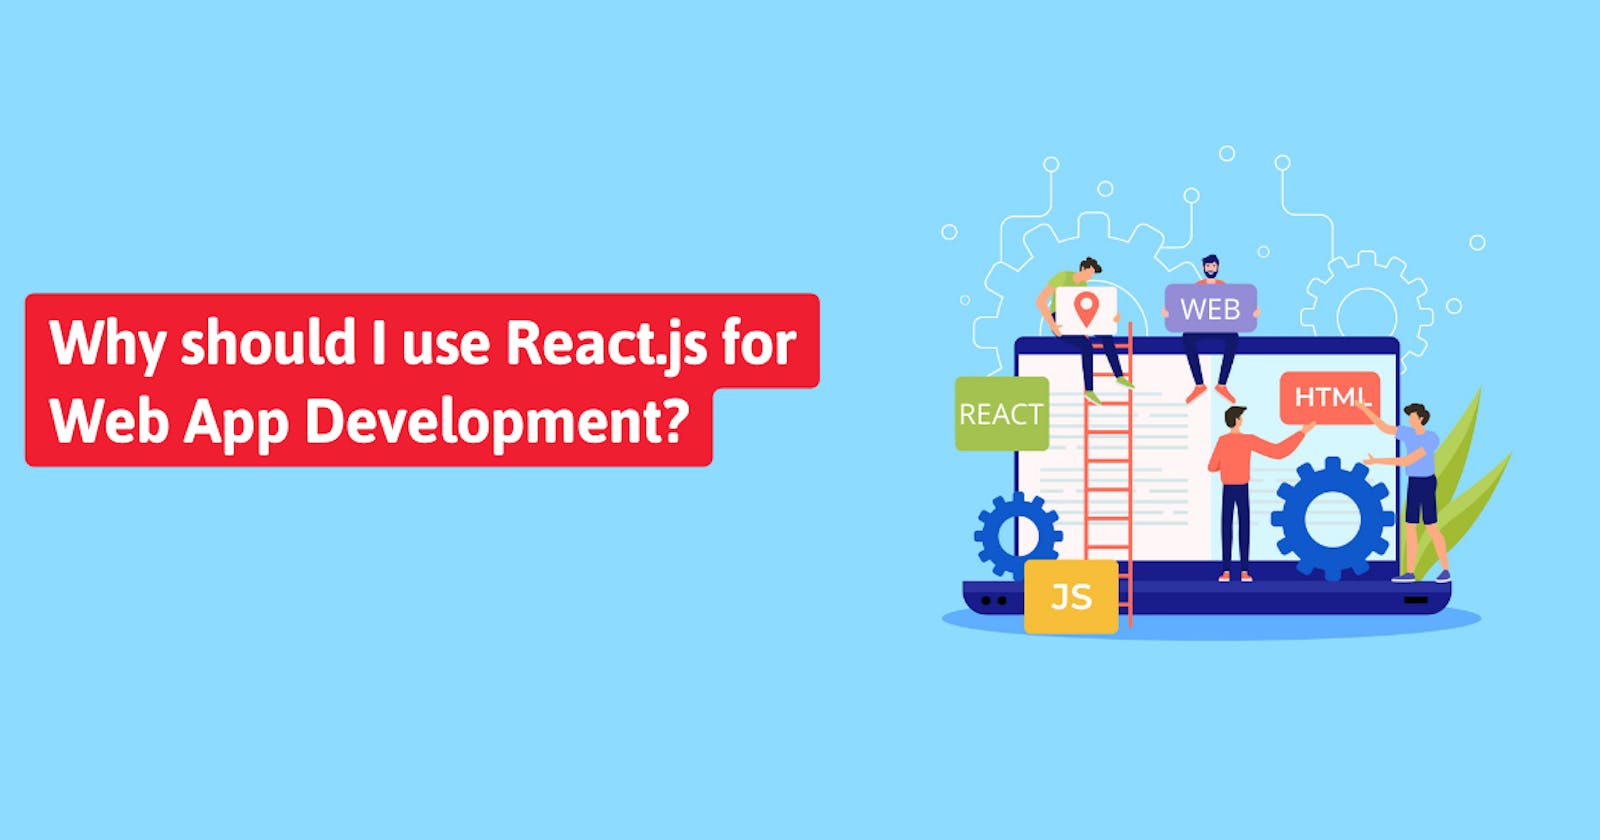 Why should You Use React.js for Web App Development?